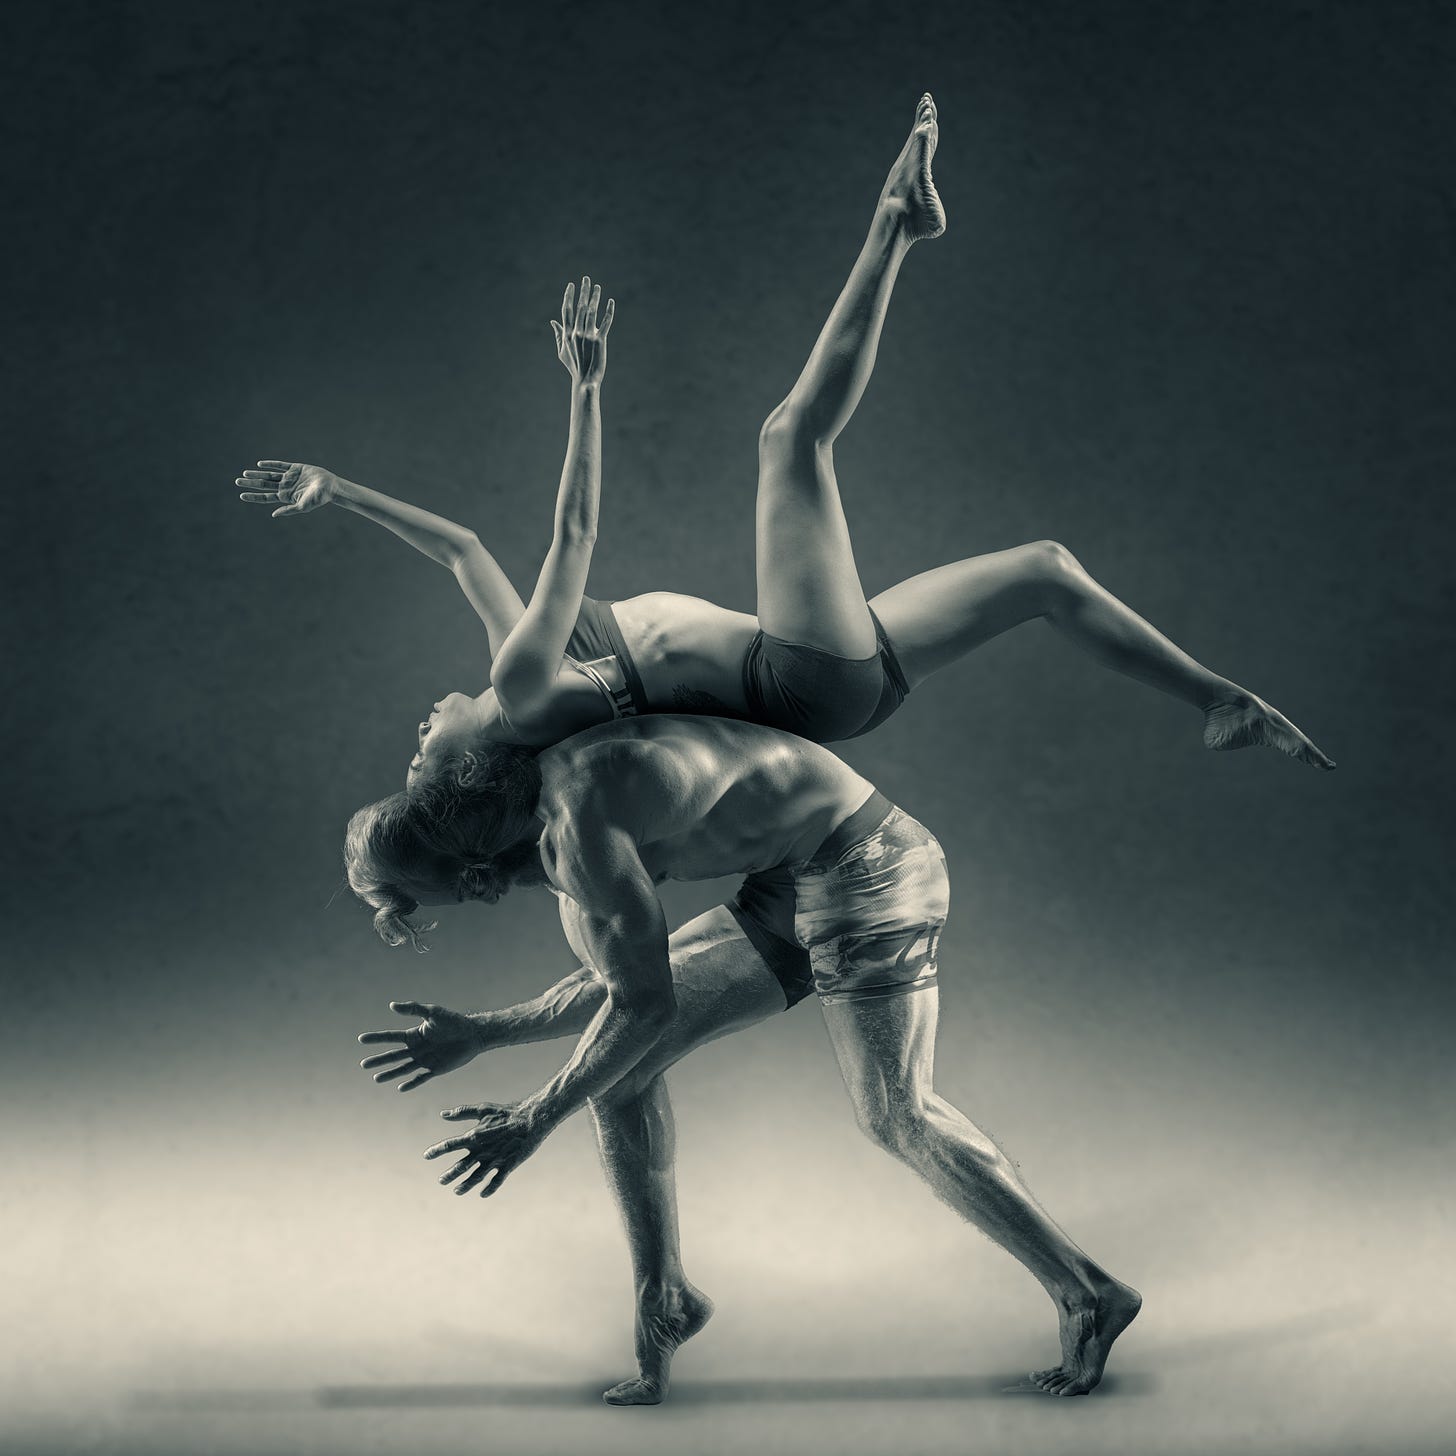 one person balancing on their back on top of the back of another person who is bent over. black and white photo